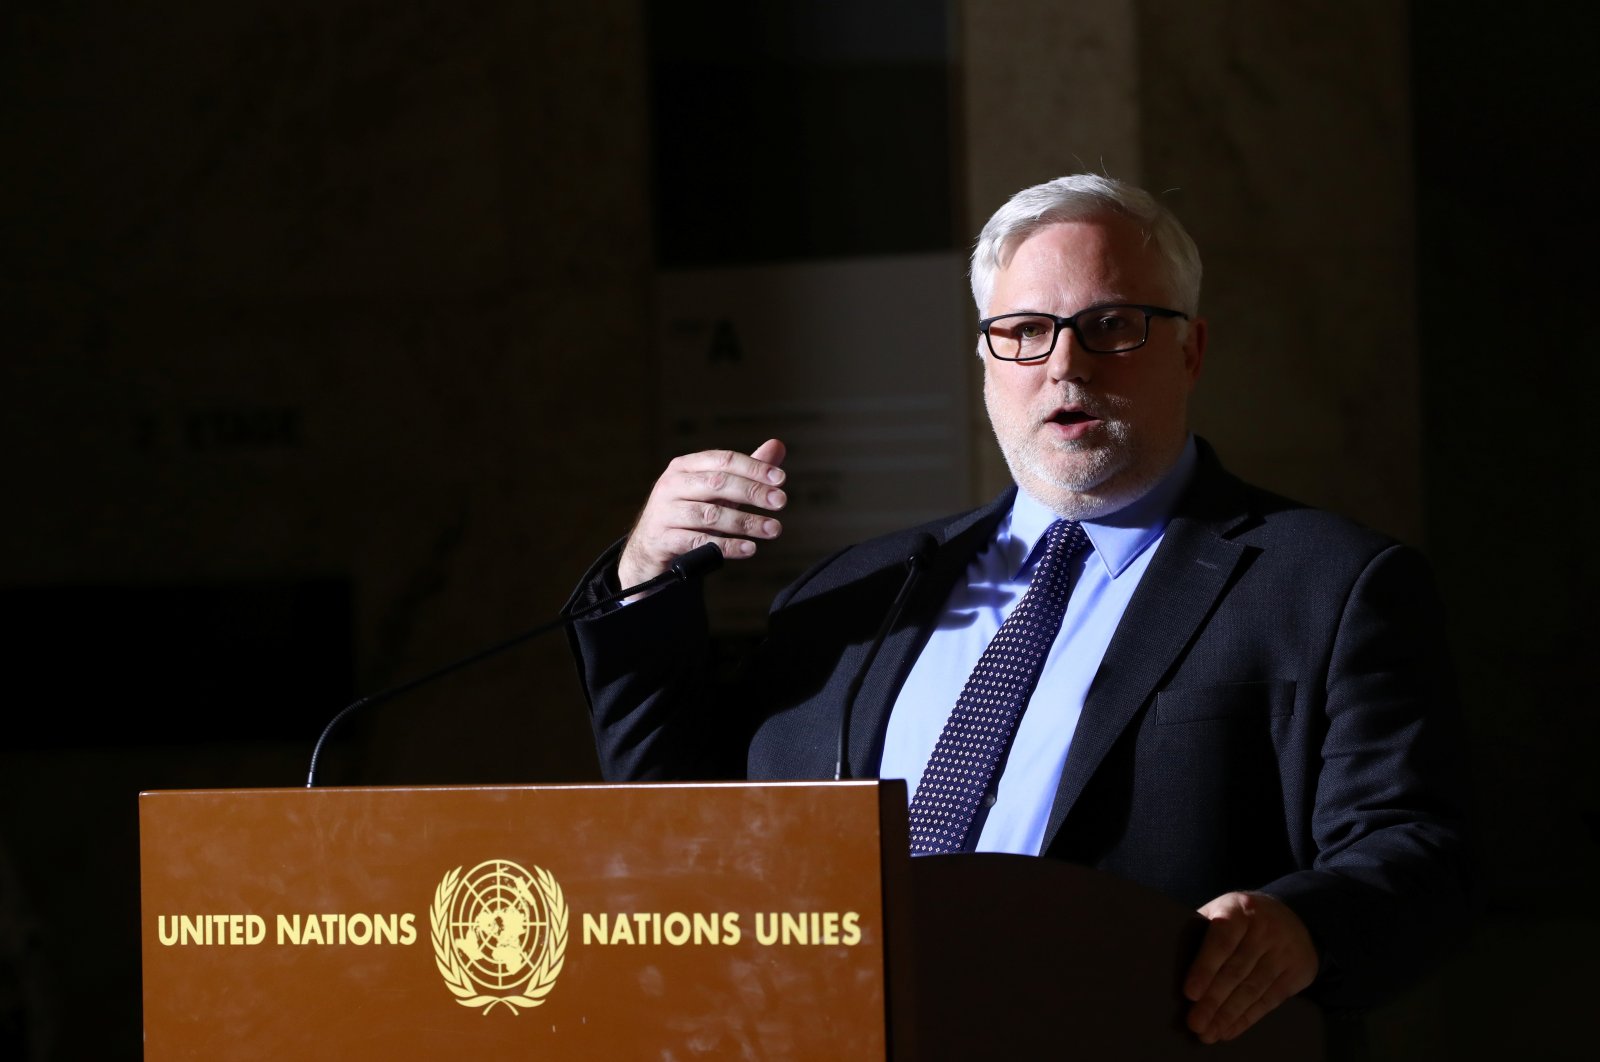 Joel Rayburn, former United States Deputy Assistant Secretary for Levant Affairs and Special Envoy for Syria, attends a news conference at the United Nations in Geneva, Switzerland, Oct. 29, 2019. (Reuters Photo)